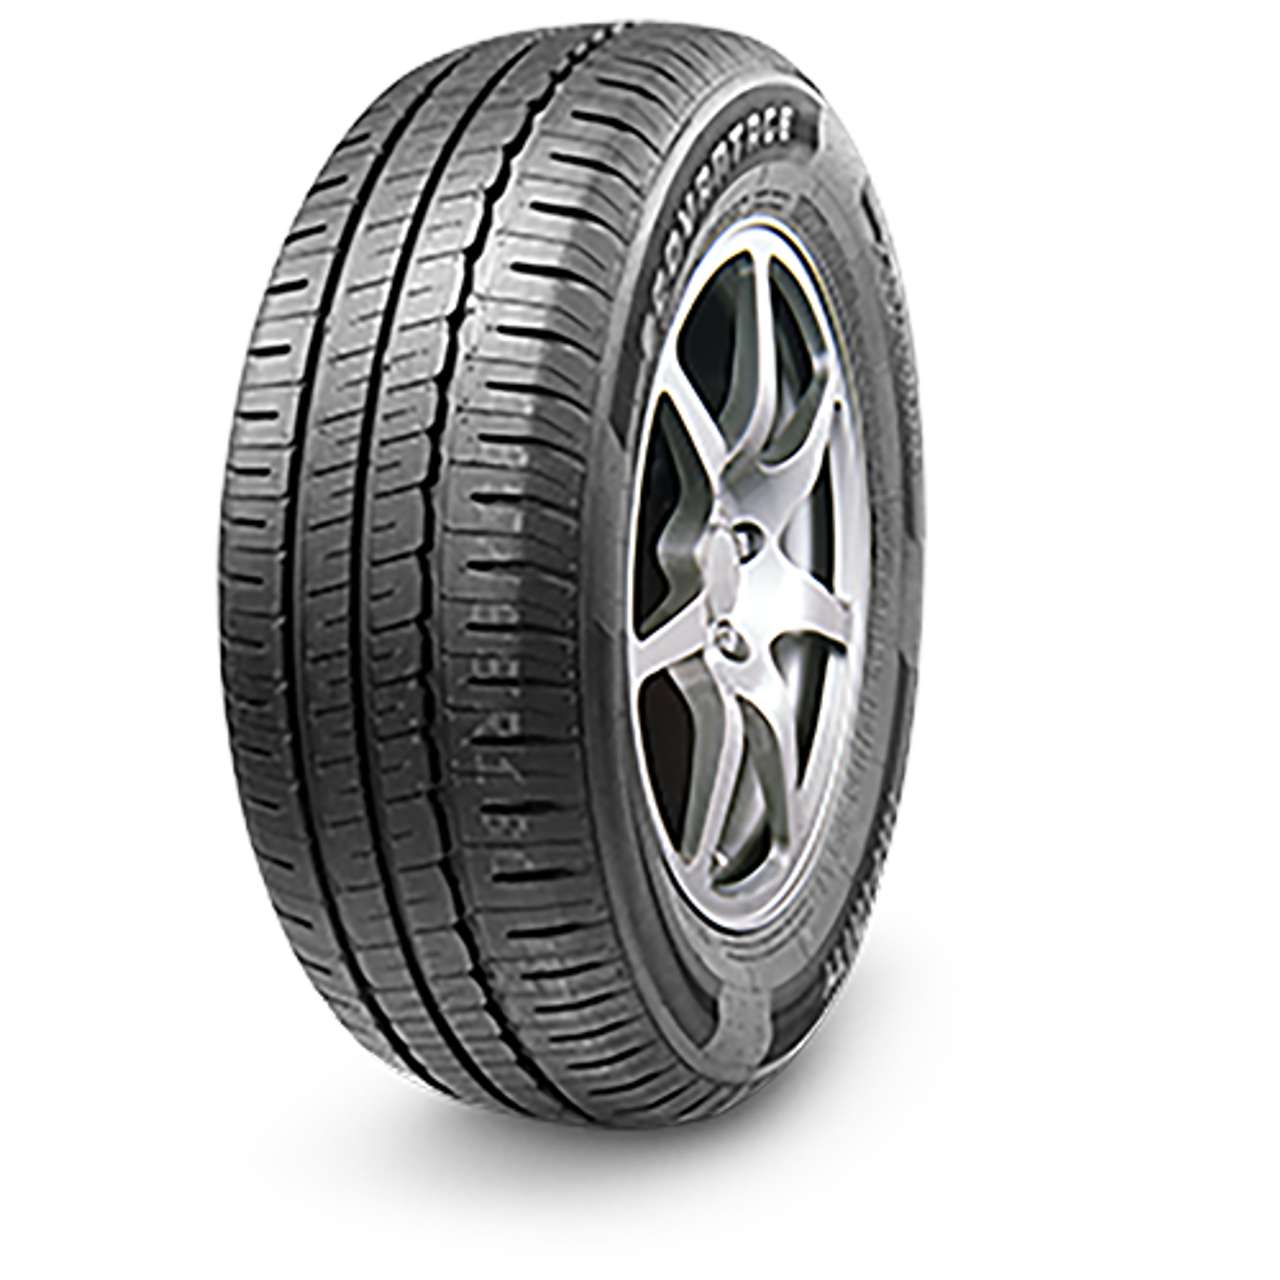 LINGLONG GREEN-MAX WINTER ICE I-15 205/60R16 96T NORDIC COMPOUND BSW von LINGLONG